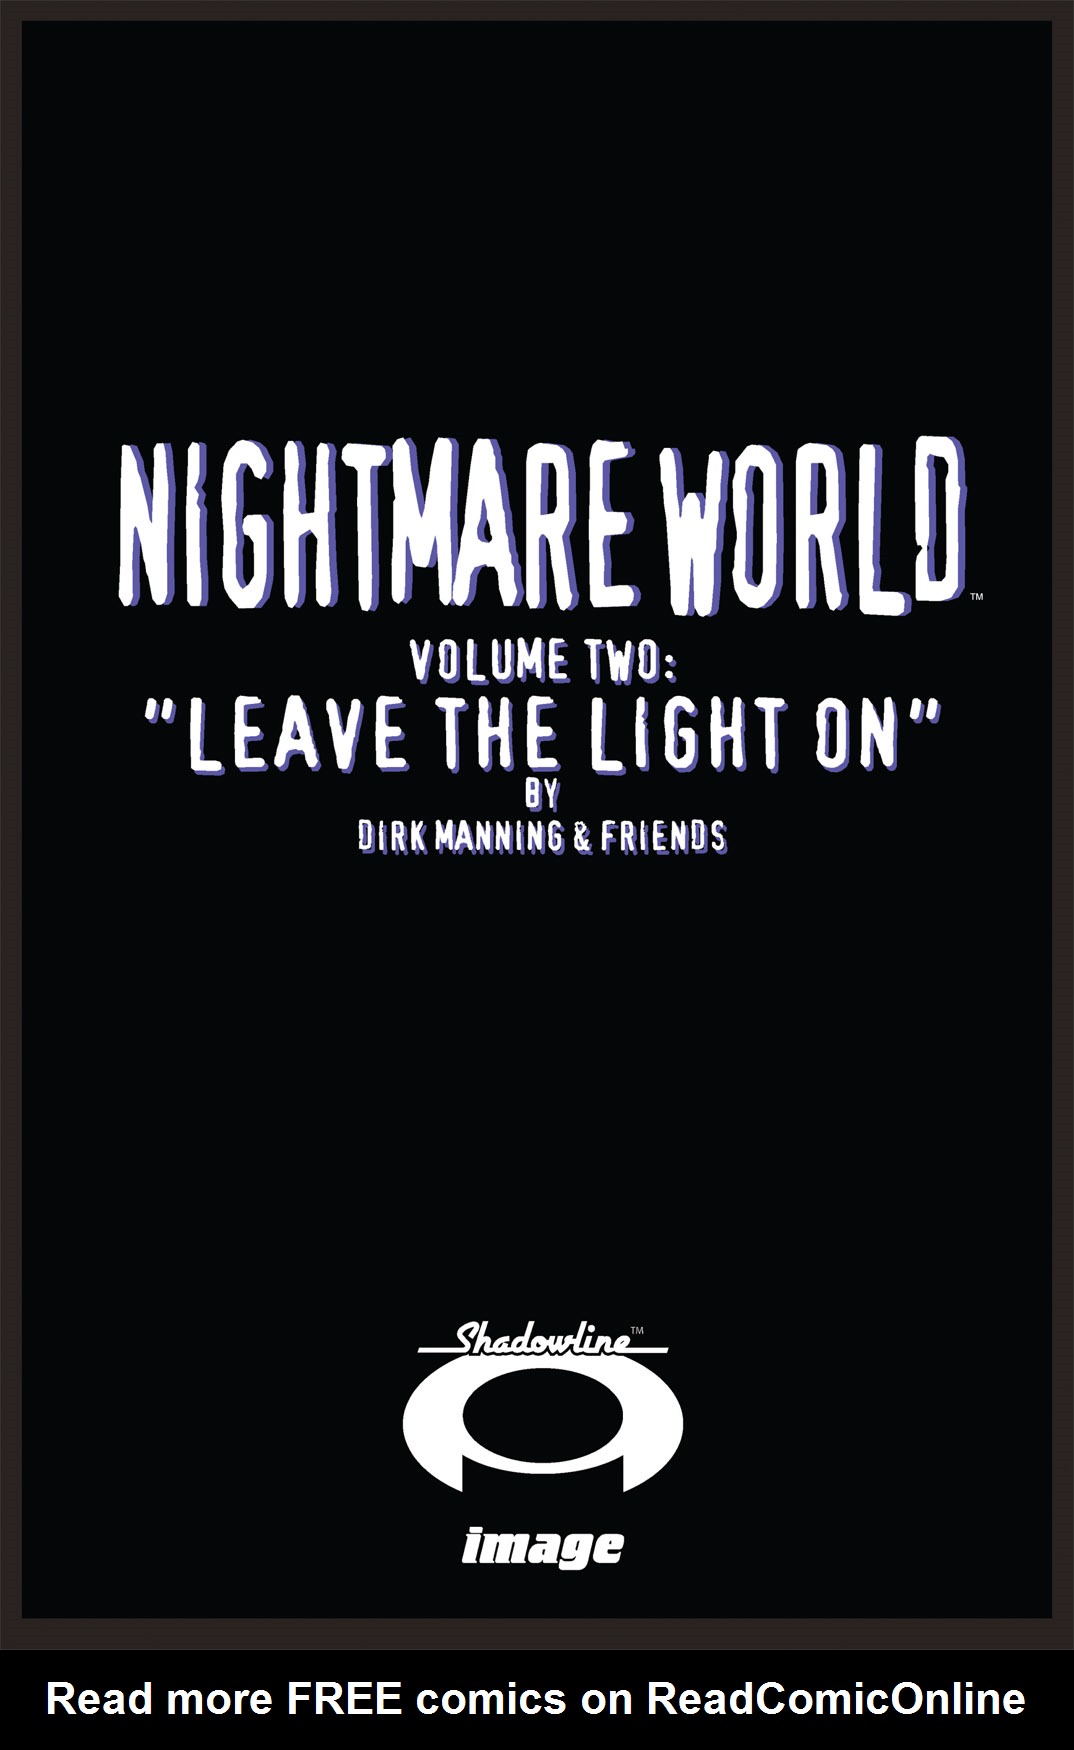 Read online Nightmare World comic -  Issue # Vol. 2 Leave the Light On - 2